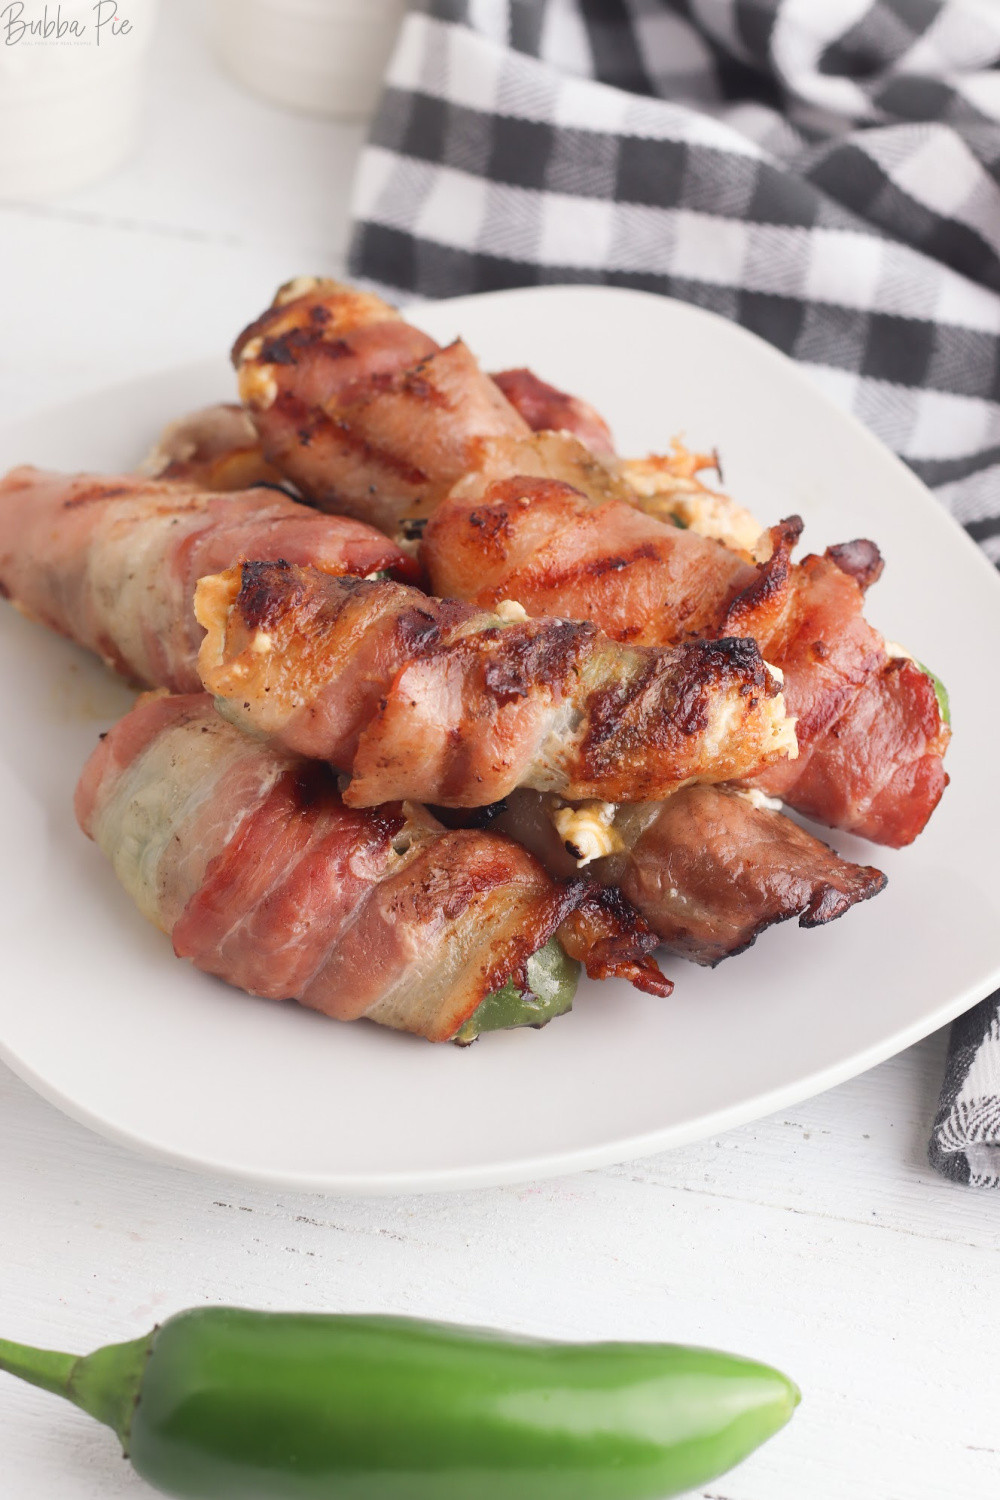 Grilled Bacon Wrapped Jalapeno Poppers
 Grilled Jalapeno Poppers BubbaPie